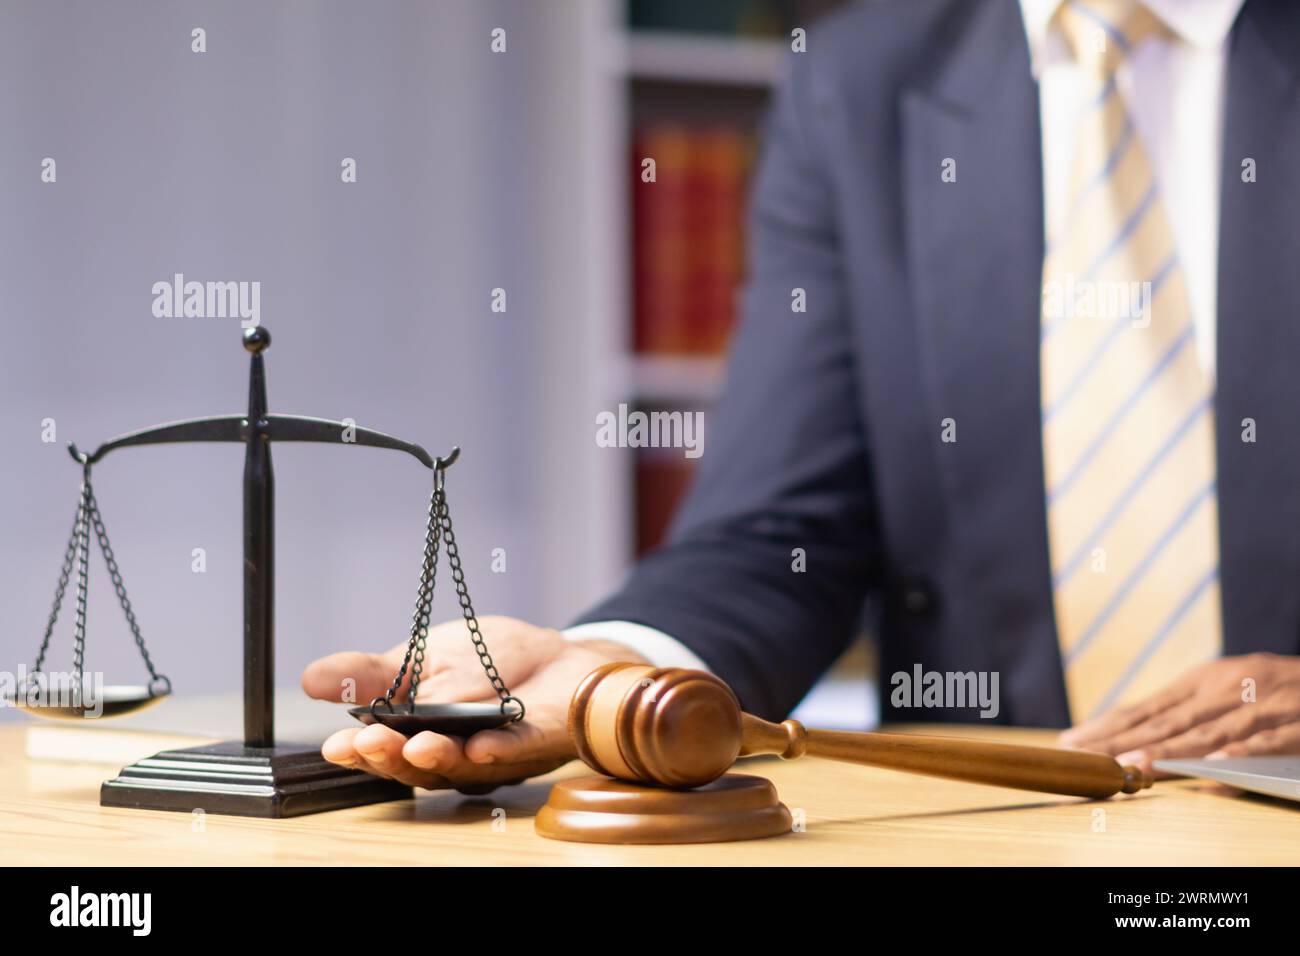 Brass scales are placed on lawyers desks in legal advice offices as a symbol of fairness and integrity in the High Court decision making. Brass scales Stock Photo